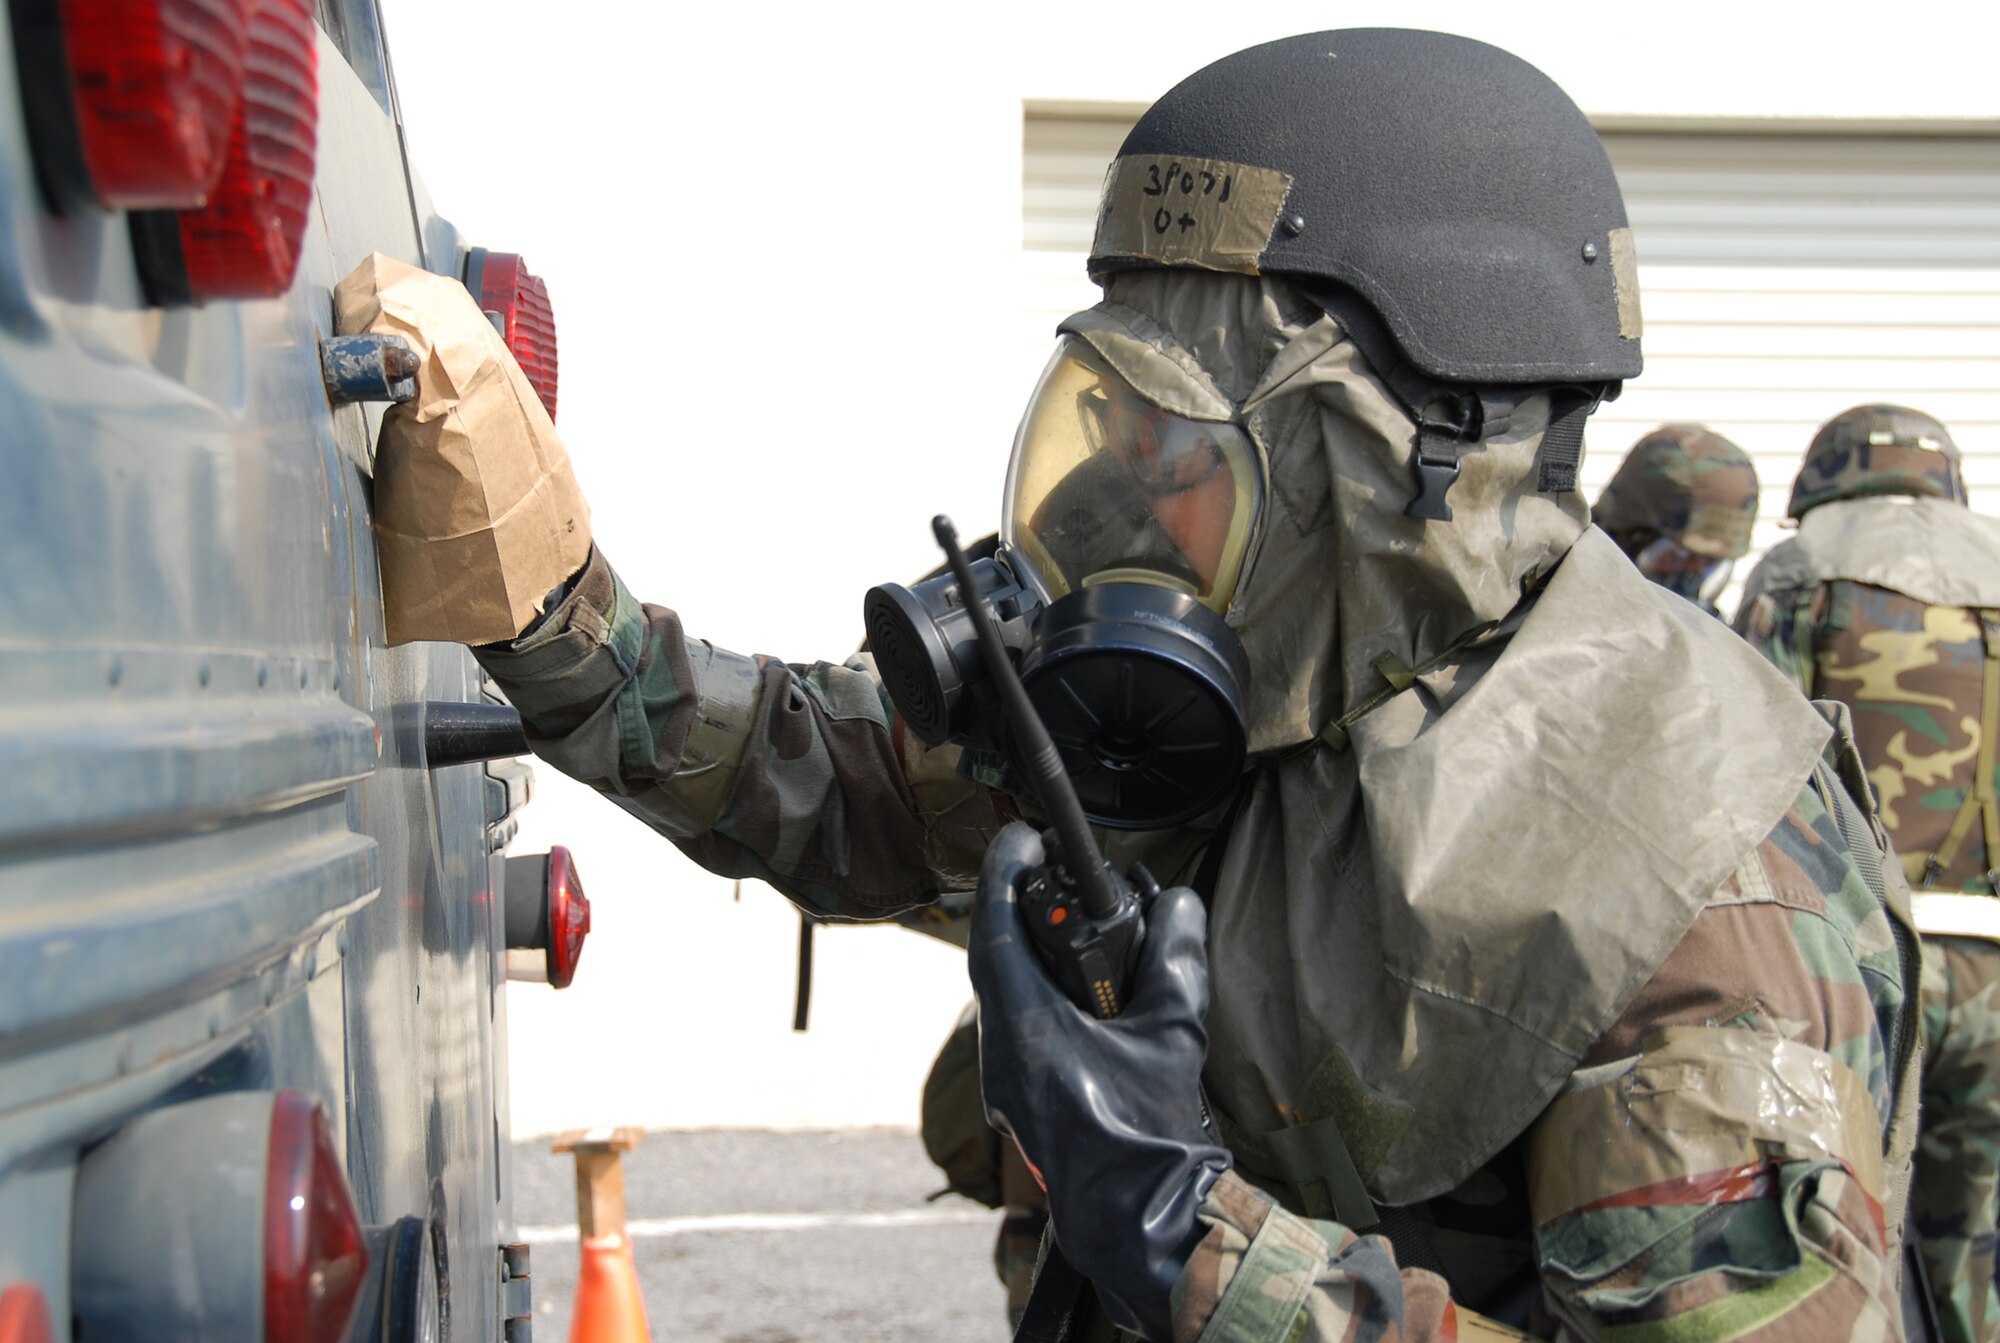 Tech. Sgt. Robert Roller decontaminates a bus prior to evacuation to a relocation point following a simulated missile attack during Local Operational Readiness Exercise Beverly High 08-3 at Kadena Air Base, Japan, Jan. 10, 2007. The 18th Wing conducted the exercise from Jan. 7 to 11 to test the wing's ability to respond in contingency situations.   (U.S. Air Force photo/Tech Sgt. Anthony Iusi)